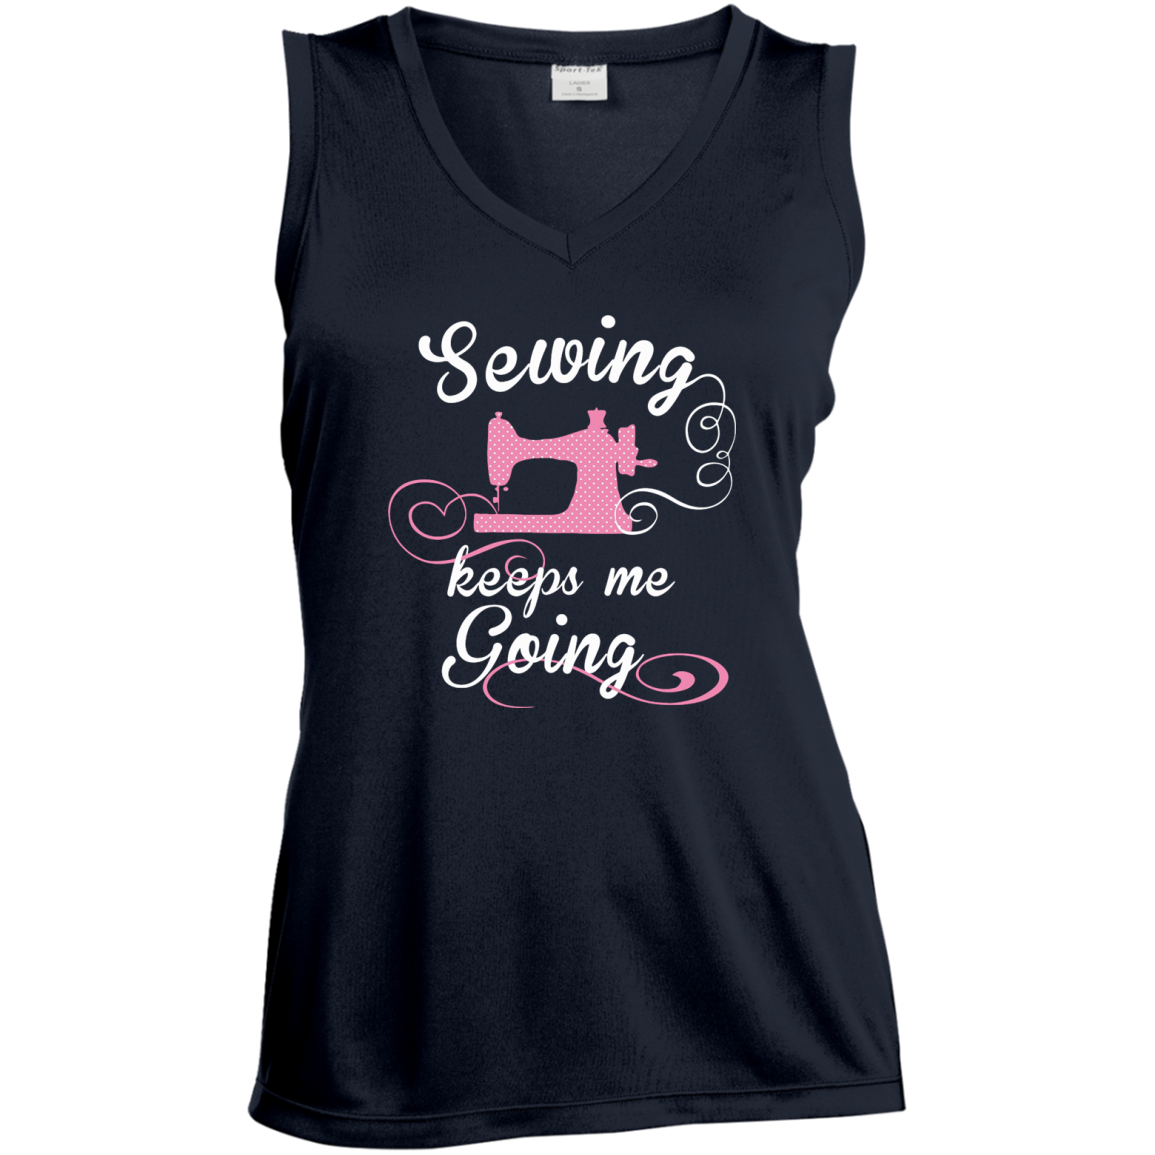 Sewing Keeps Me Going Ladies Sleeveless V-Neck - Crafter4Life - 2